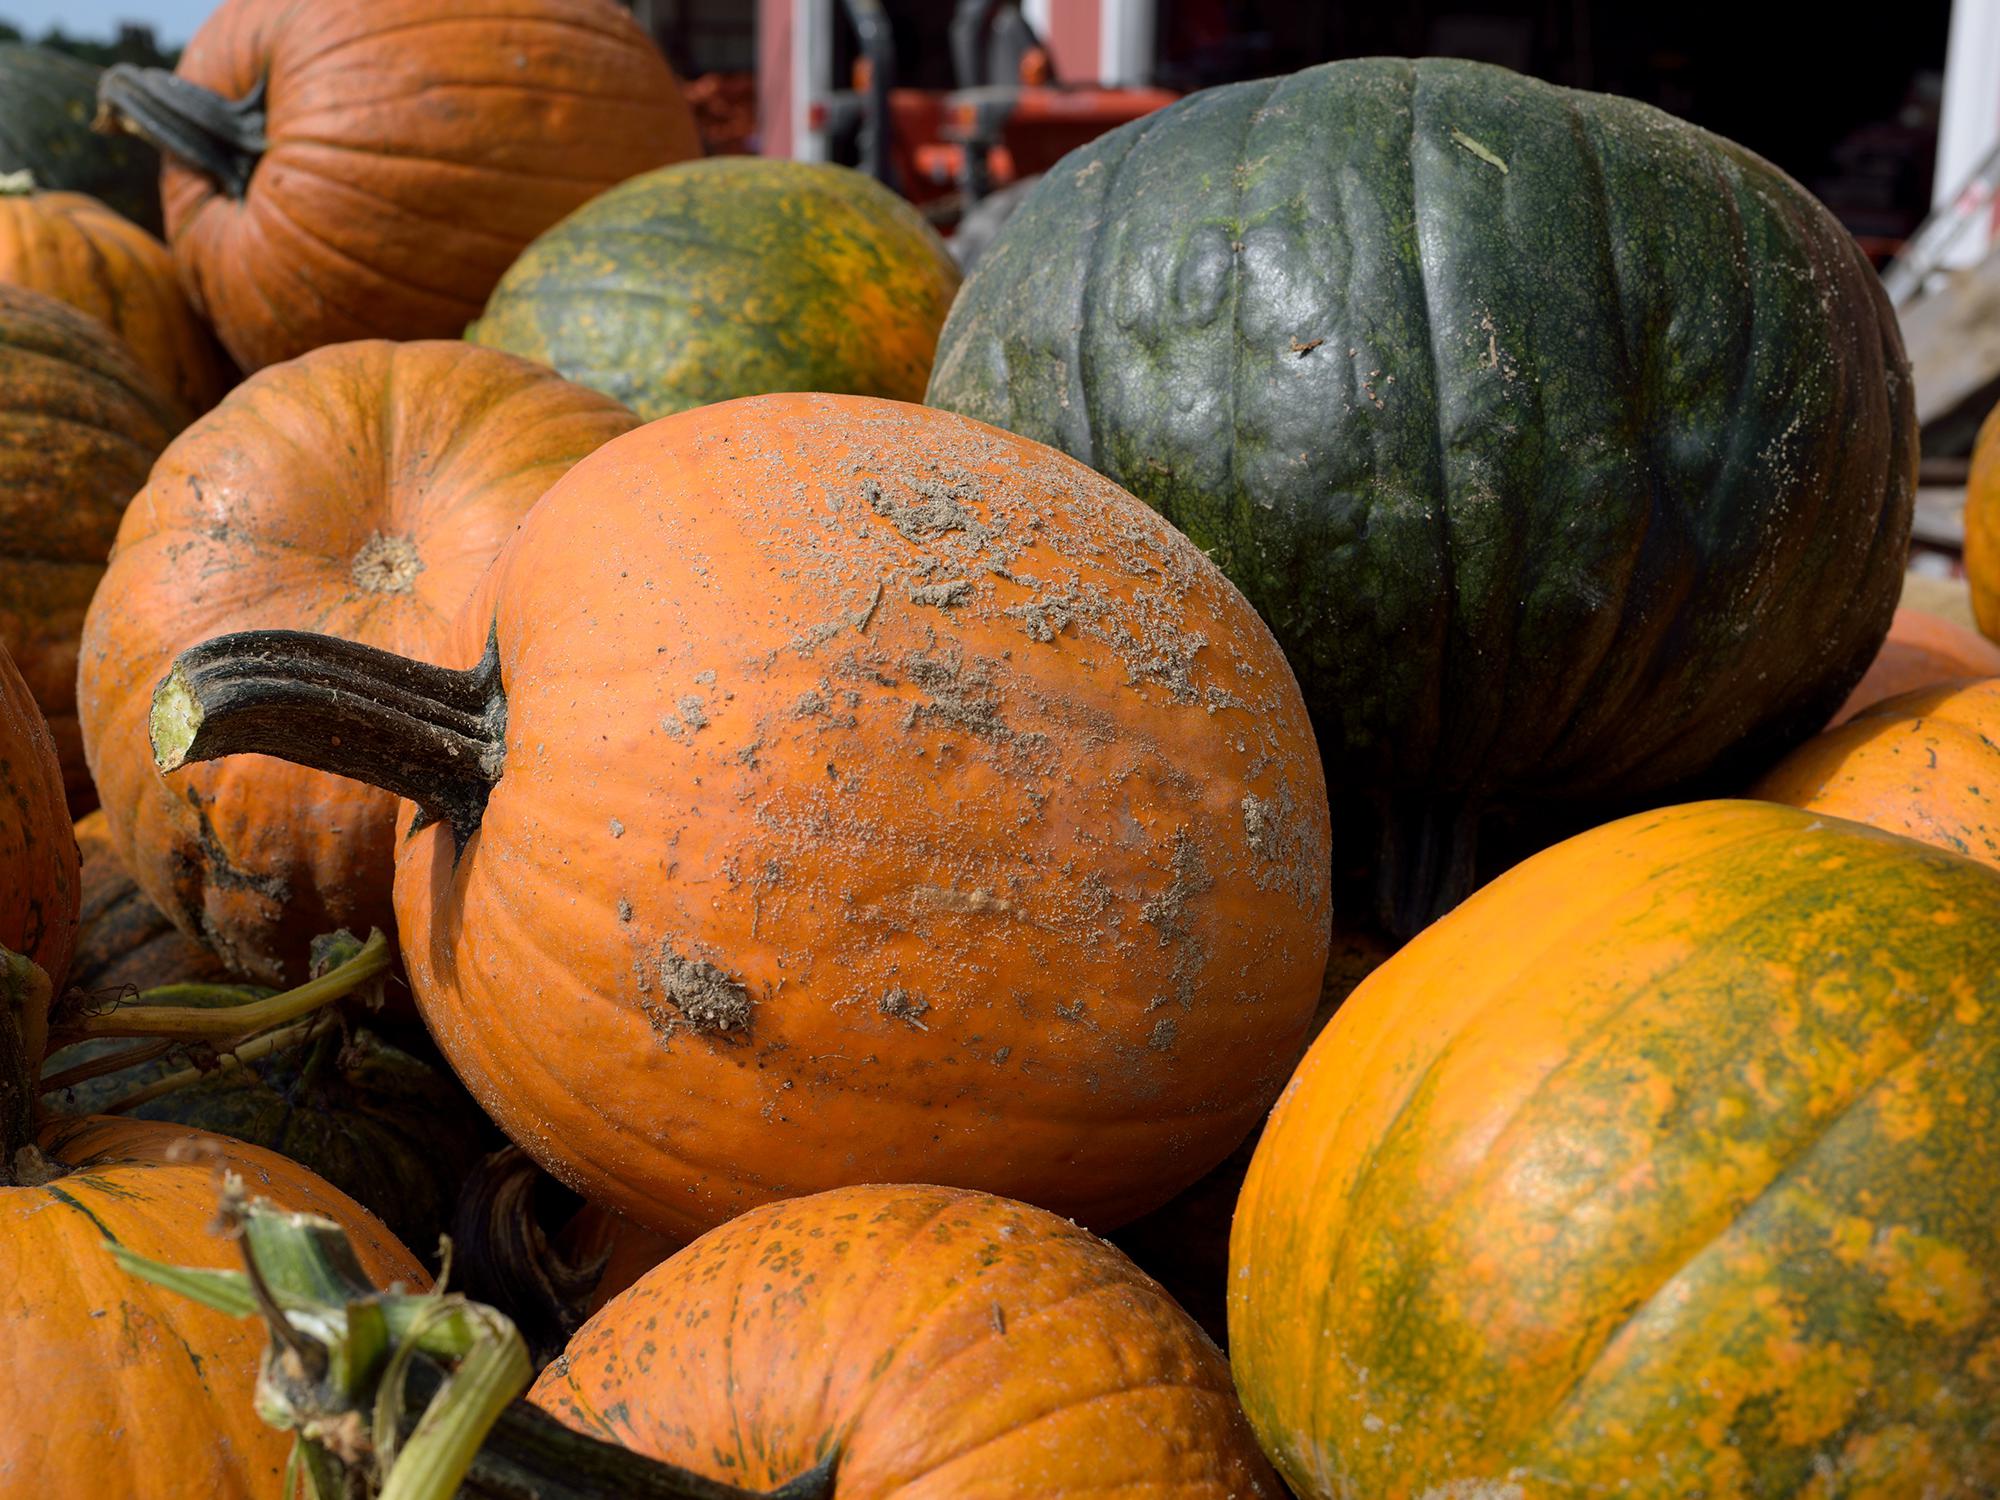 Wet weather during the growing season delayed pumpkin harvest and increased disease pressure for some Mississippi growers. These pumpkins were displayed at Mitchell Farms in Collins, Mississippi on Oct. 20, 2014. (Photo by MSU Ag Communications/Kevin Hudson)